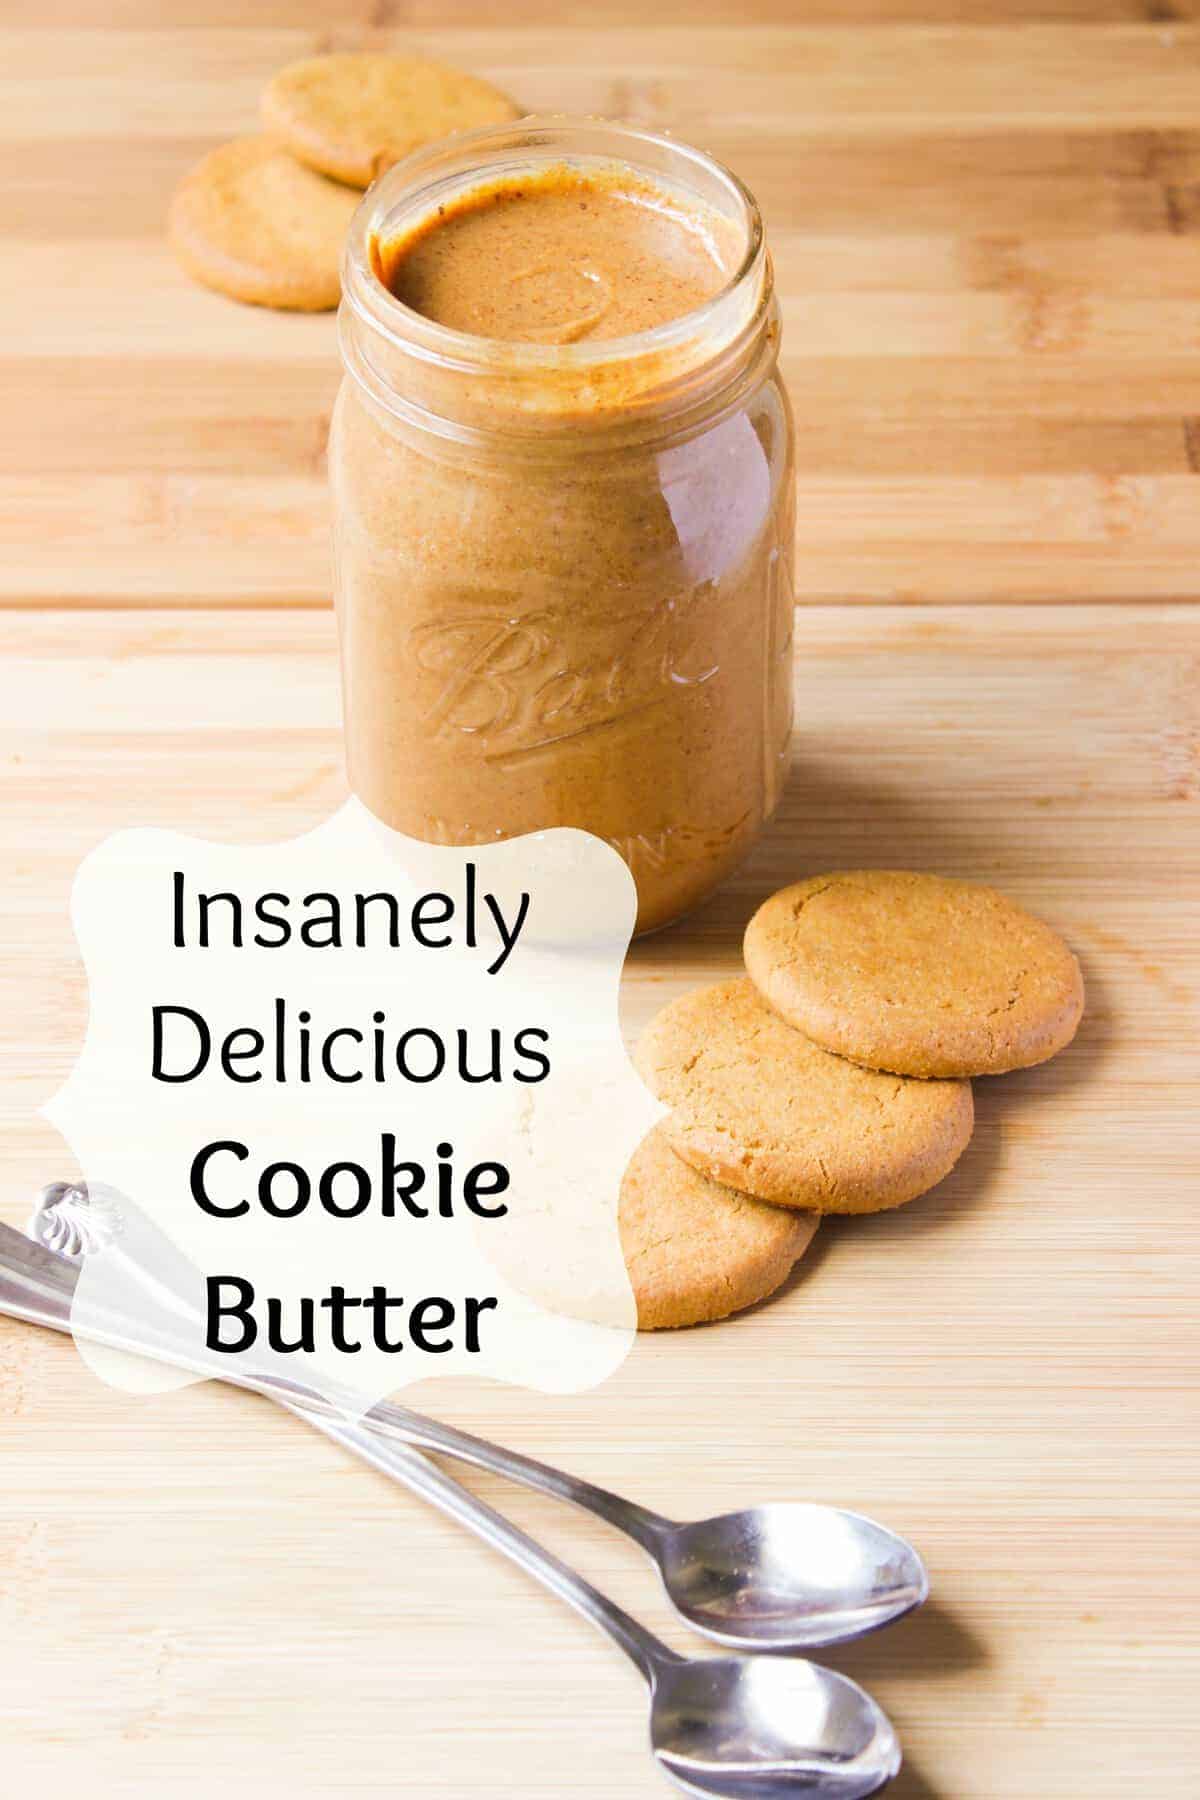  Cookie butter in a glass jar.